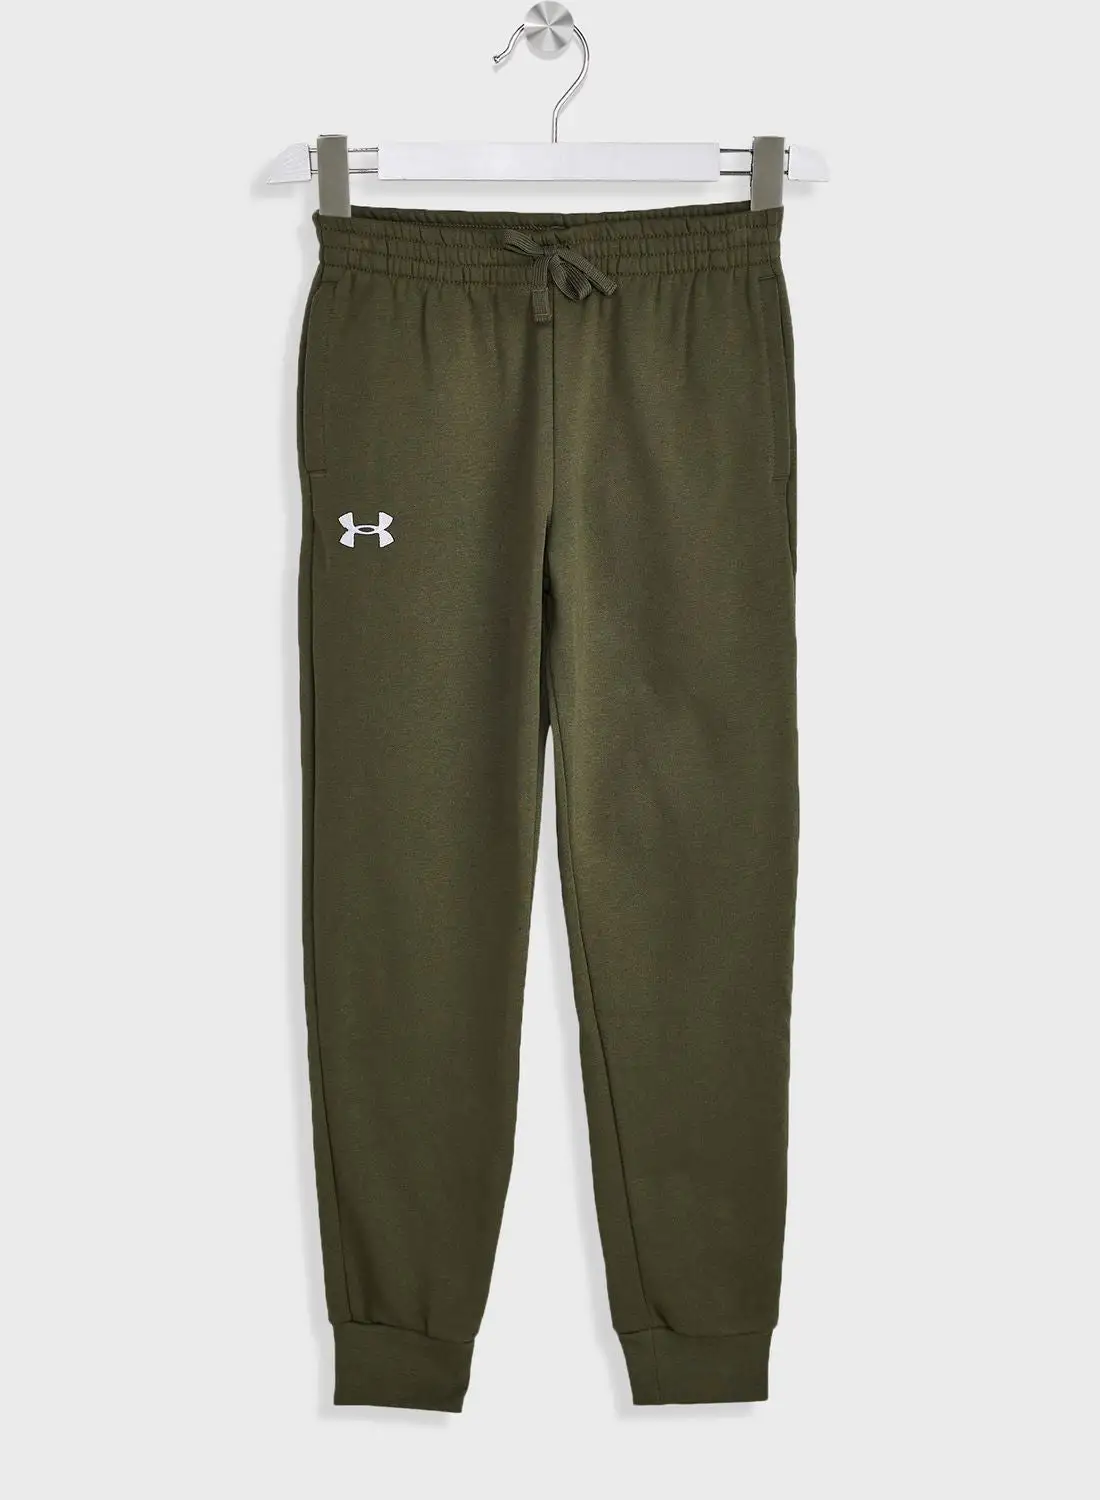 UNDER ARMOUR Youth Rival Fleece Joggers